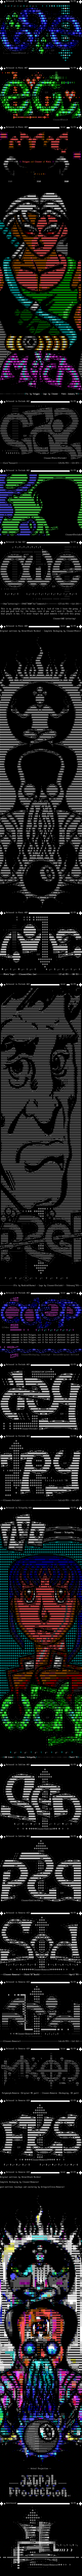 1999 Ascii Collection by Cleaner